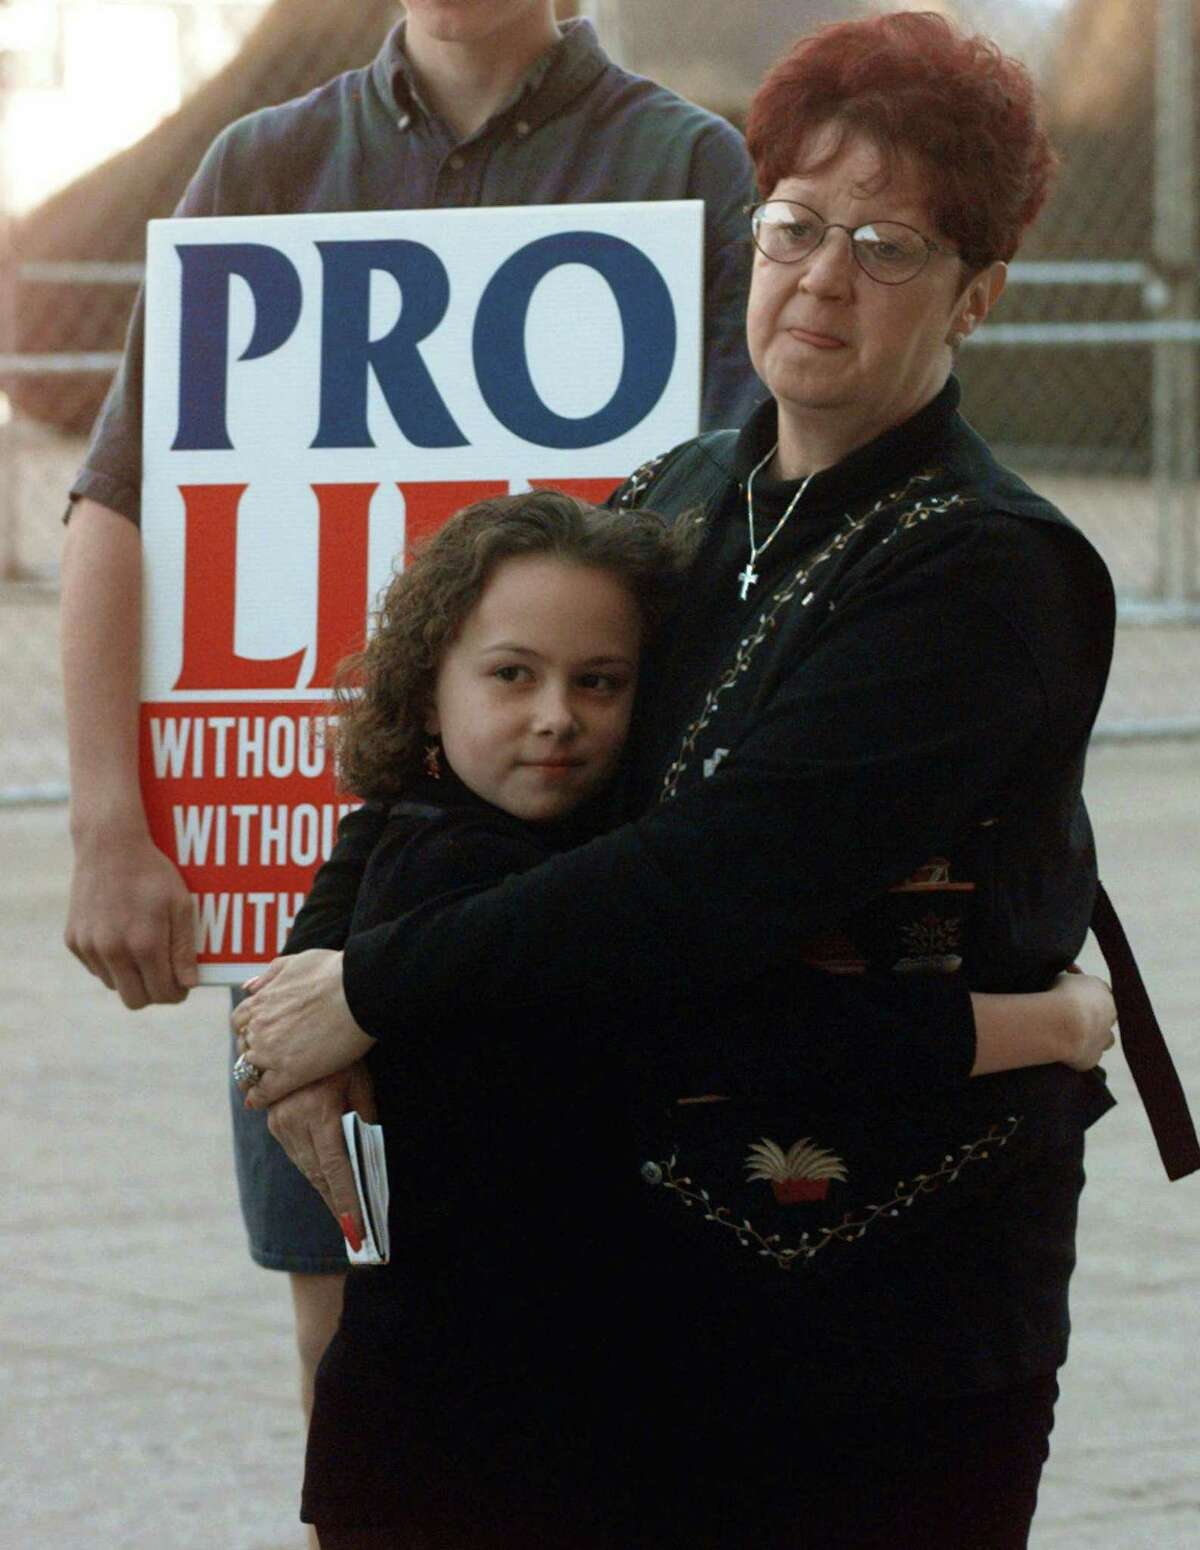 FILE - In this Jan. 22, 1997, file photo, Norma McCorvey, right, known as Jane Roe in the landmark U.S. Supreme Court ruling 24 years ago that legalized abortion nationwide, stands with her friend Meredith Champion, 9, at an Operation Rescue rally in downtown Dallas. Norma McCorvey, the "Jane Roe" at the center of the 1973 U.S. Supreme Court decision that legalized abortion, has died. She was 69. Journalist Joshua Prager, who is working on a book about McCorvey, says she died Saturday, Feb. 18, 2017, morning at an assisted living centre in Katy, Texas. Although McCorvey was the plaintiff in Roe v. Wade, she later became an anti-abortion activist. (AP Photo/Ron Heflin, File)